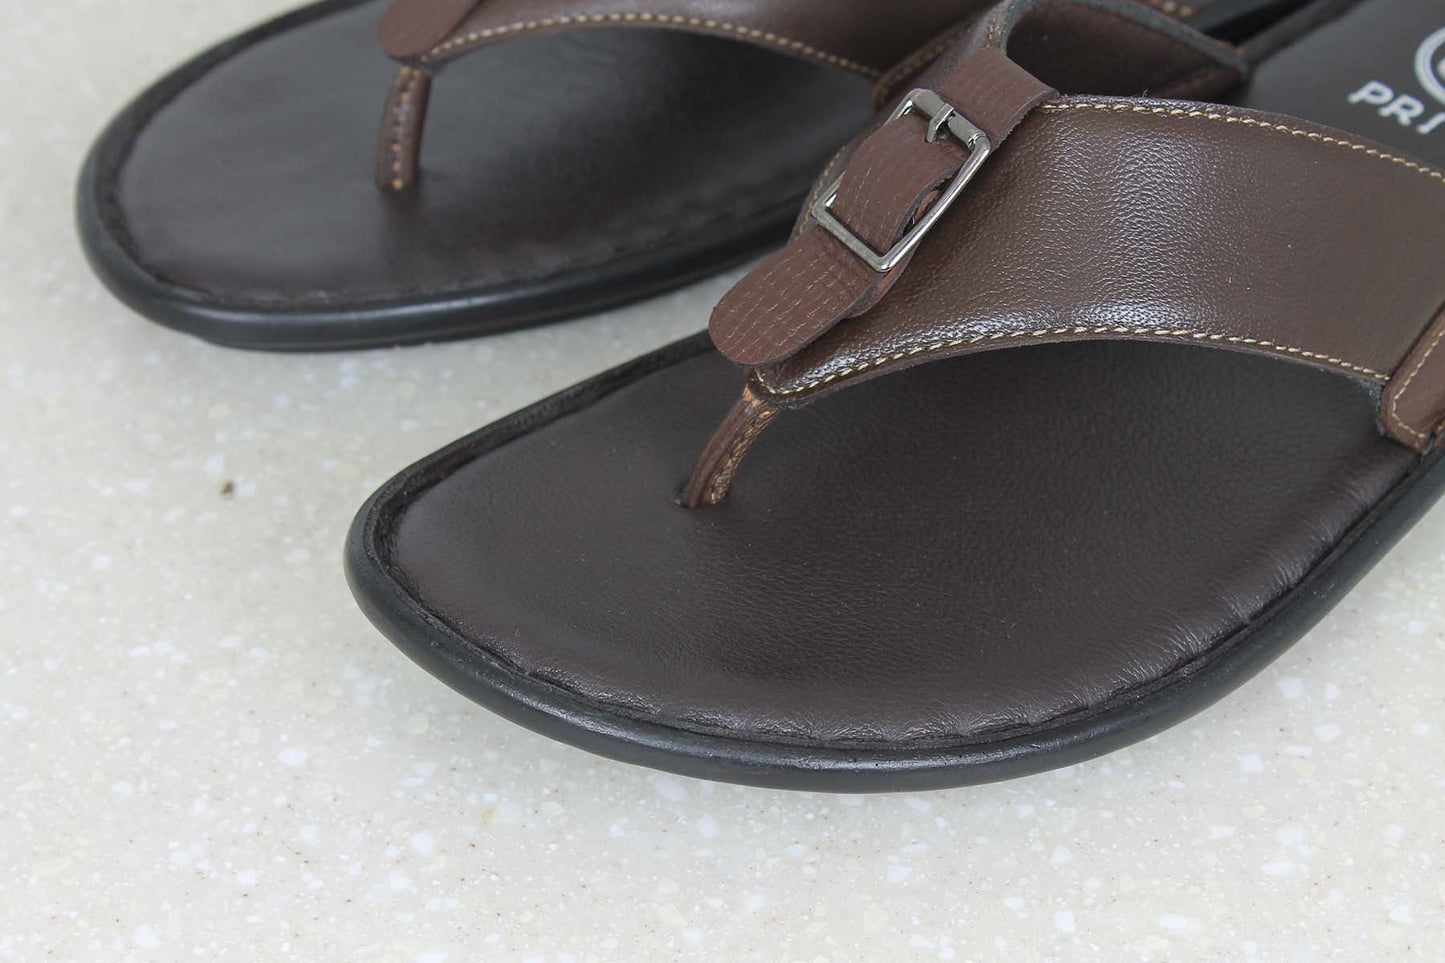 THONG SLIPPERS-BROWN-Men's Slippers-Inc5 Shoes